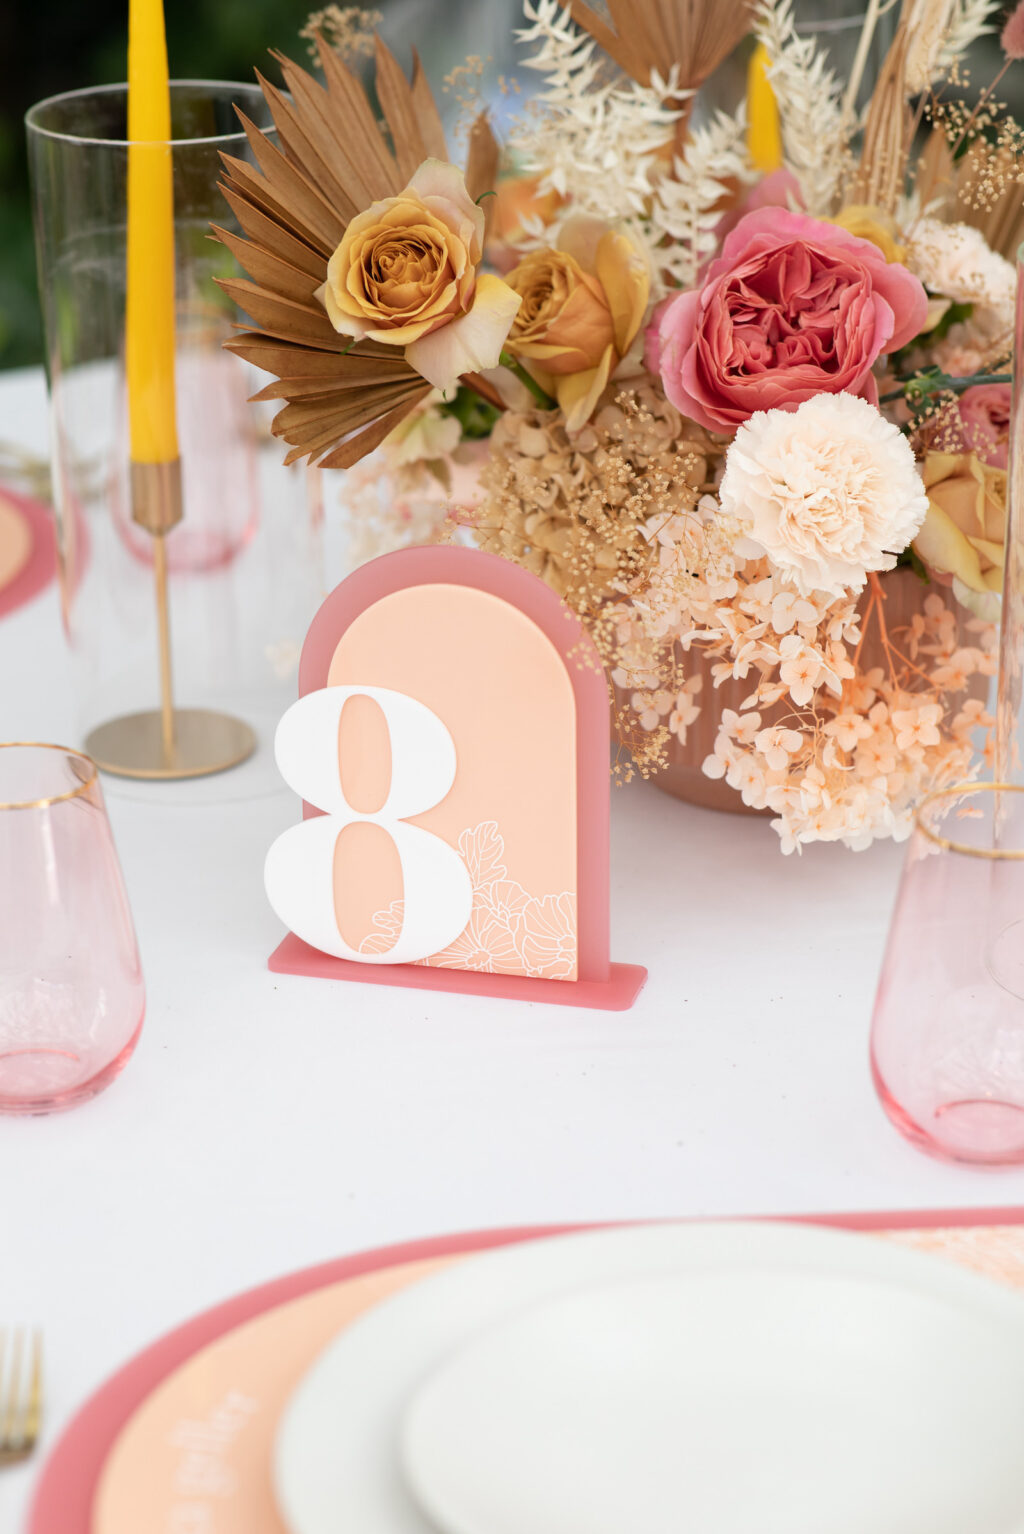 Pink and Peach Wedding Reception Table Numbers and Boho Tan Centerpiece | Tampa Bay Wedding Planner Stephany Perry Events